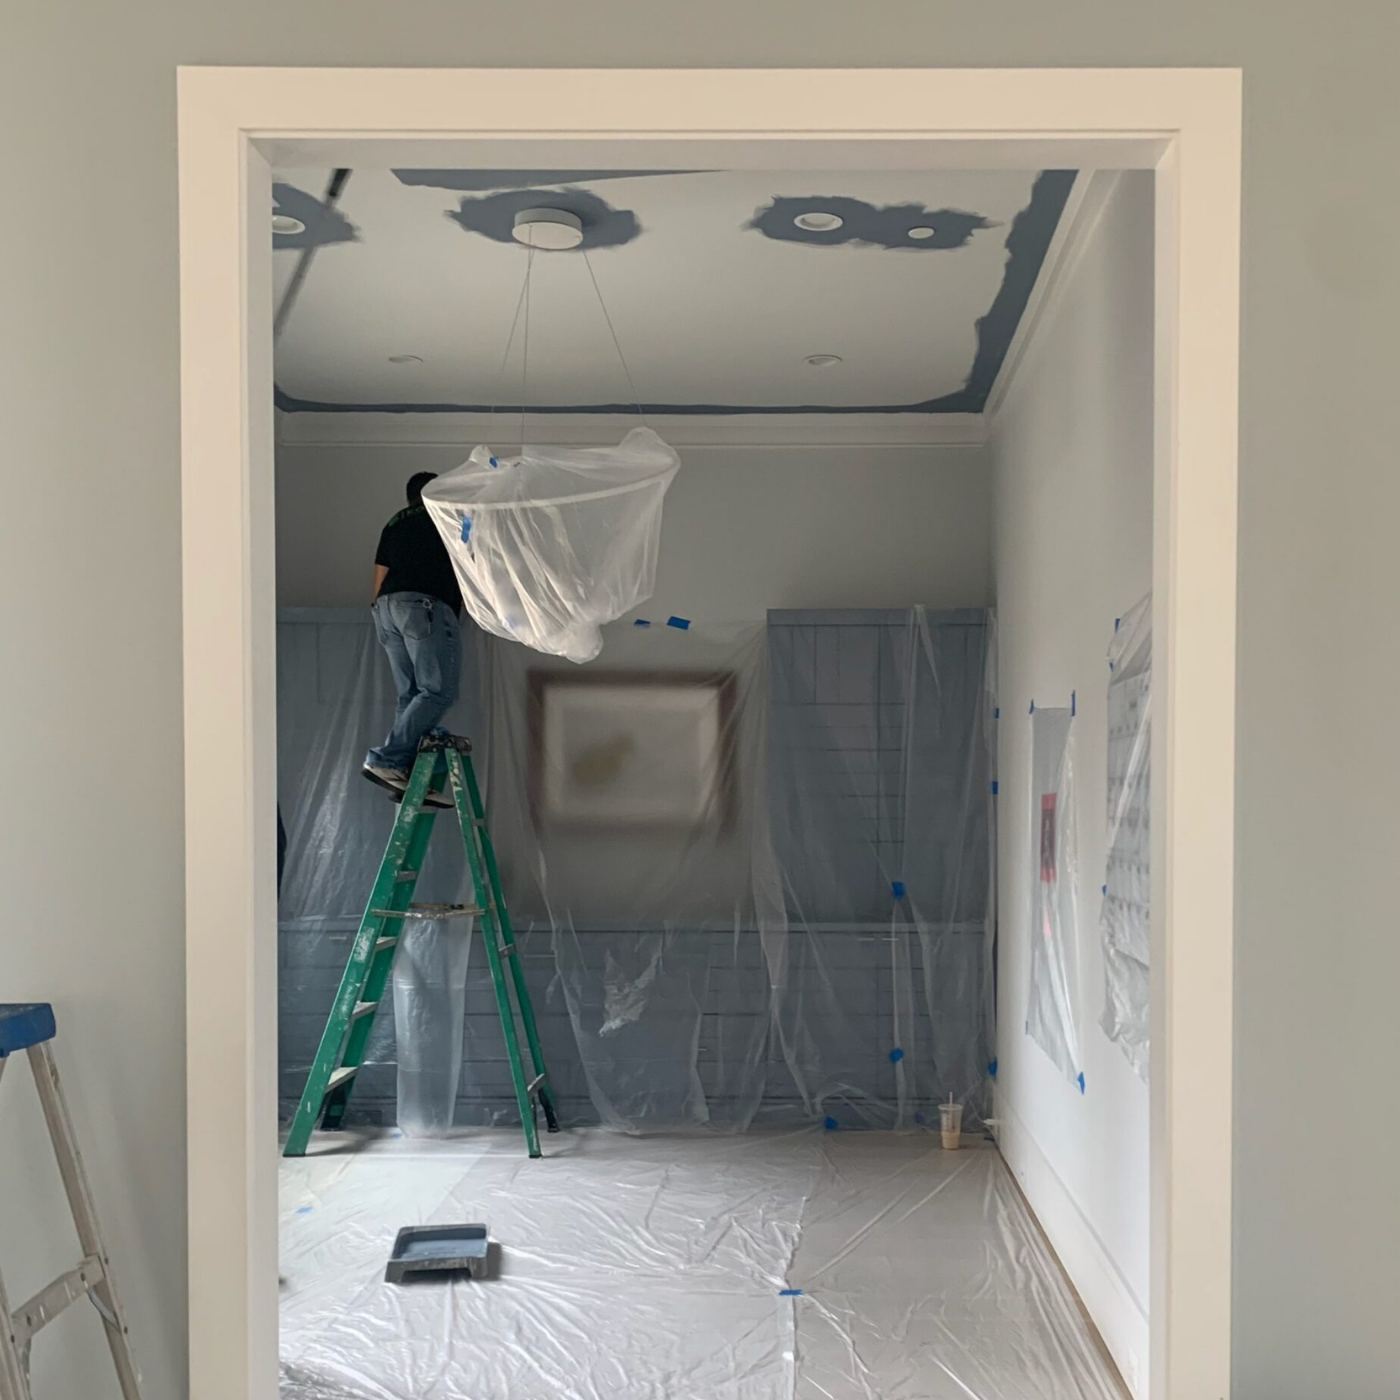 Looking into a home office from a hallway, a white door frame and gray walls frame the view. Part of a ladder is against the leftside outer wall. A large plastic sheet covers built-in gray cabinets that are taller on the left and right sides and table height in the middle. A rectangular piece of art hangs over the middle section and has a brown frame, white mat and a small darker design rendered too blurry to discern under the plastic. A person stands in front of the cabinets on the highest step of a green ladder and is facing the back wall. The white carpet is also covered in plastic and there is a paint tray full of gray-blue paint in the middle of the floor. The ceiling is partially painted, with gray-blue paint around three recessed lighting fixtures and a fixture holding a large white ring light in place that hangs from the ceiling.